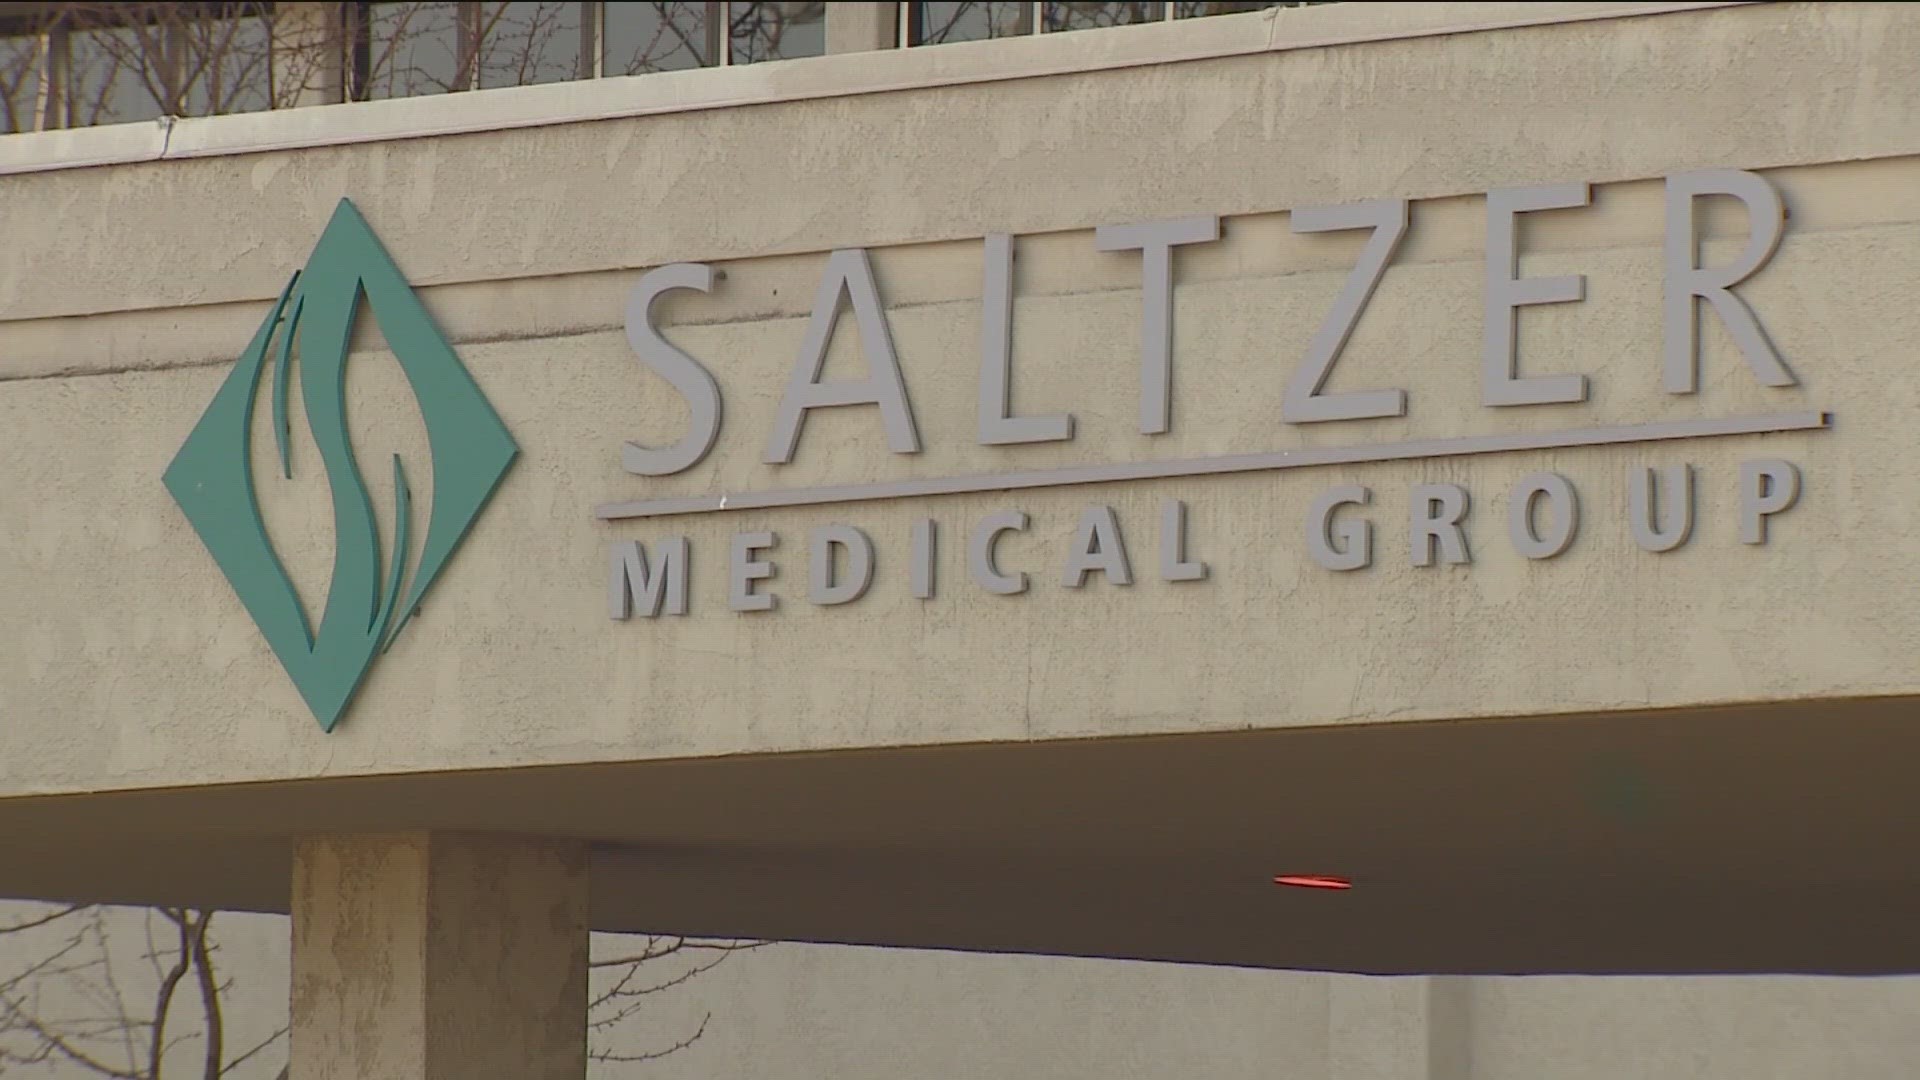 Intermountain Health, the Salt Lake City-based company that owns Saltzer Health clinics in Idaho, announced plans in January to sell or cease operations by March 29.